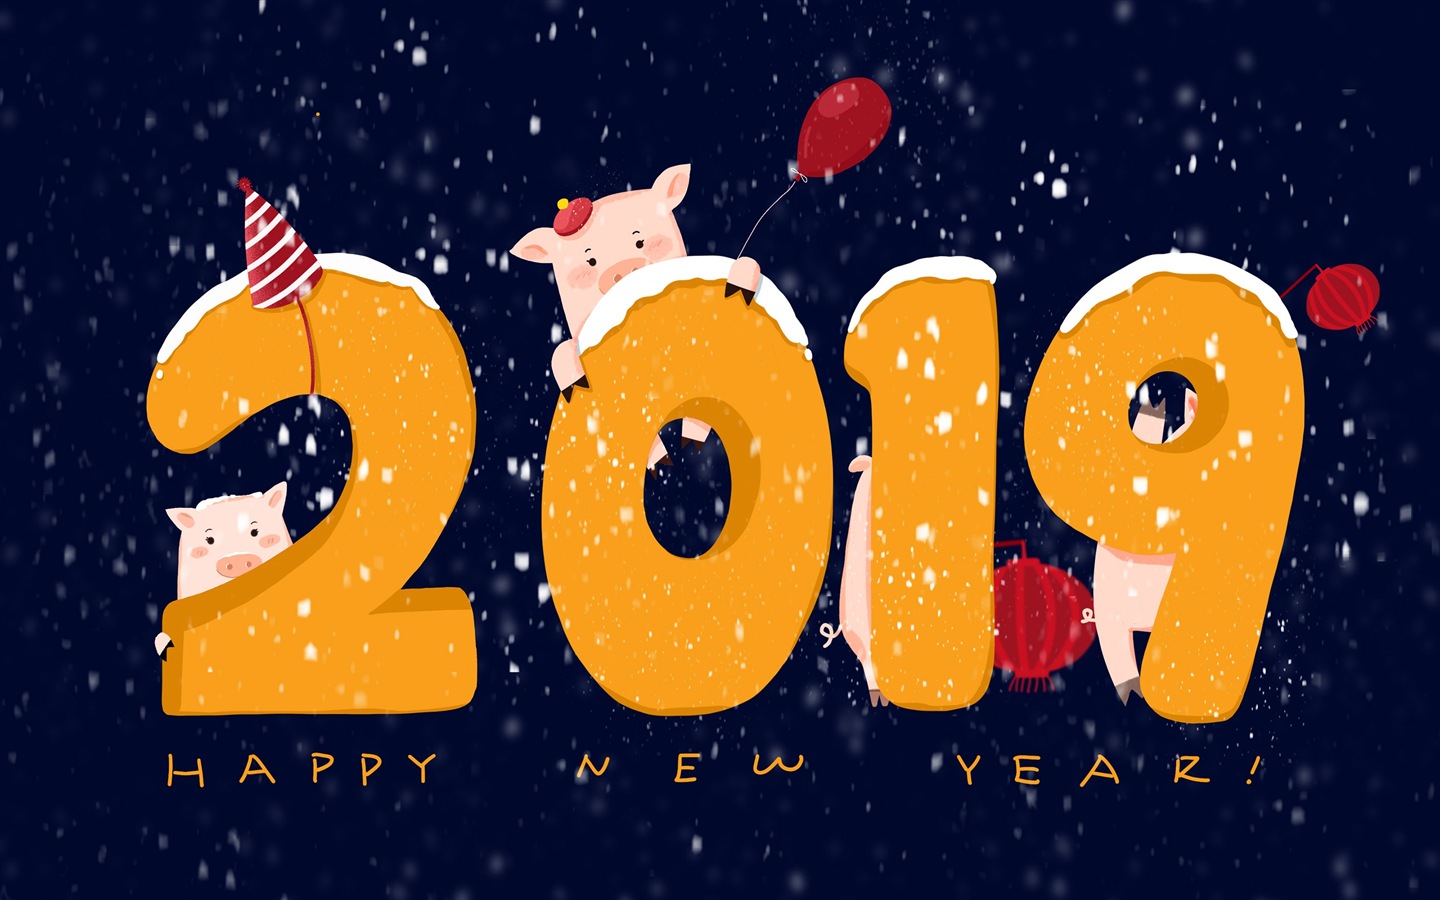 Happy New Year 2019 HD wallpapers #18 - 1440x900